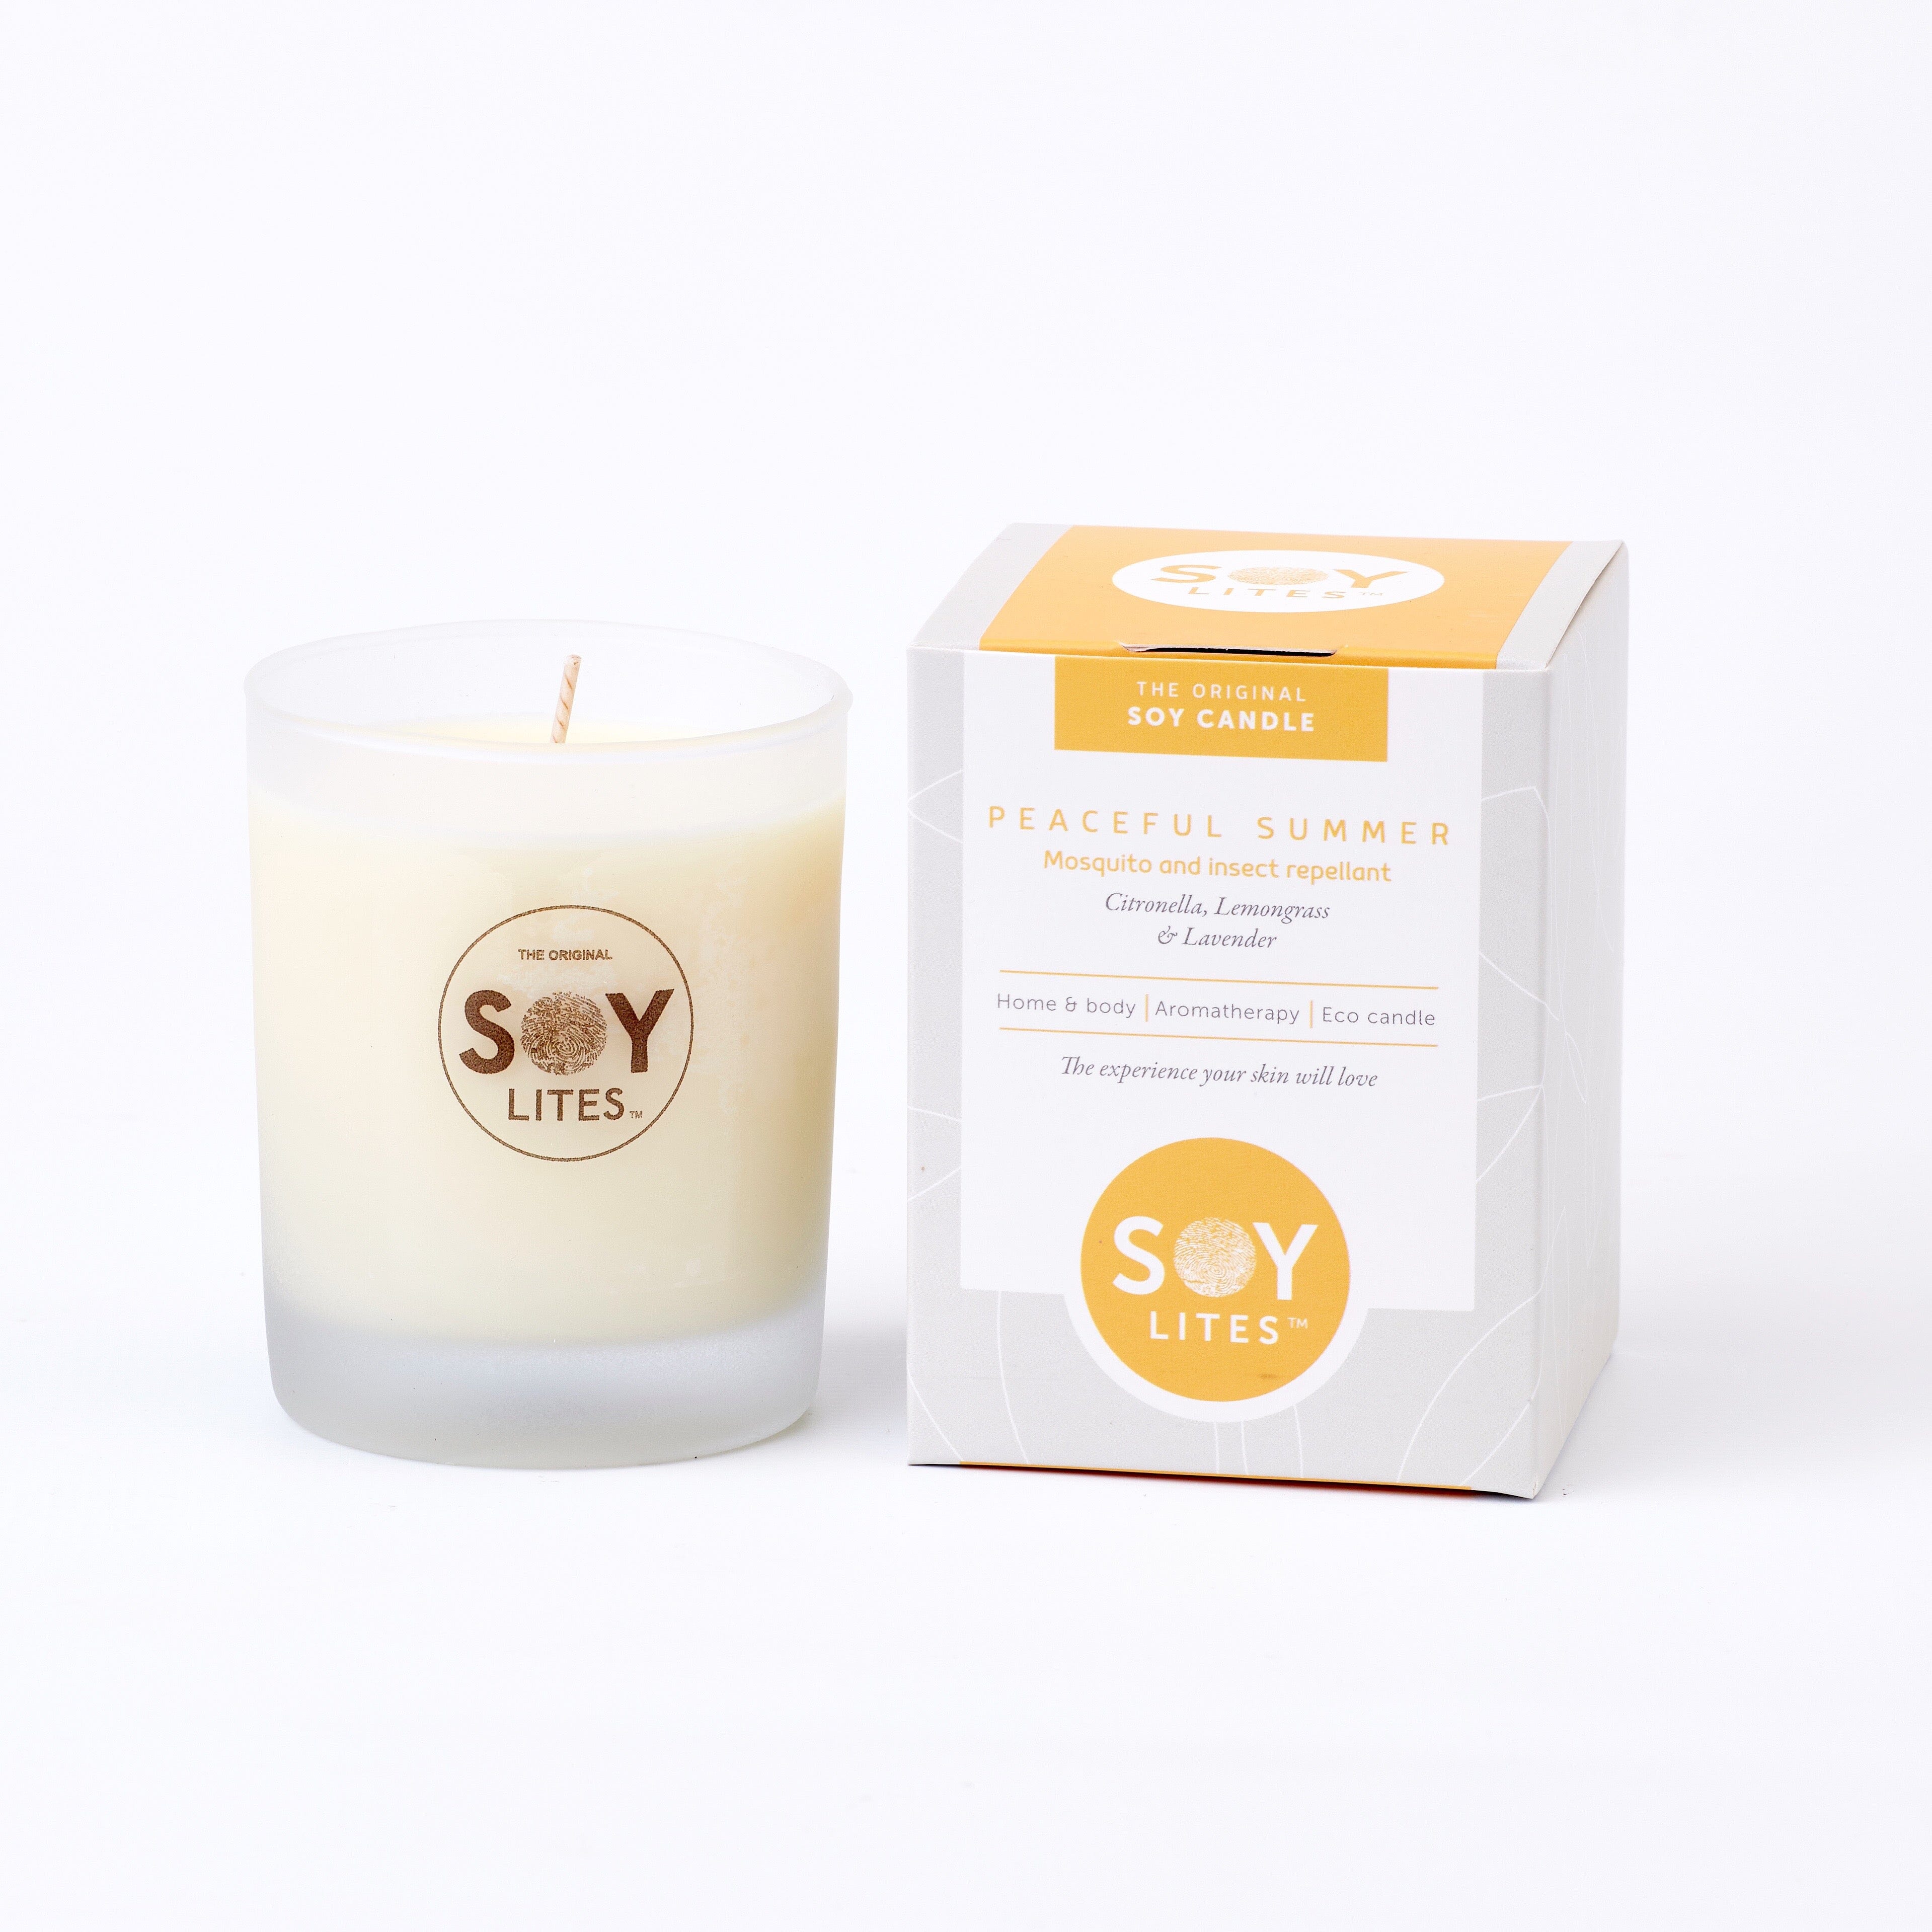 SoyLites 'Peaceful Summer' Soy Candle with Citronella, Lemongrass & Lavender Candles SoyLites 